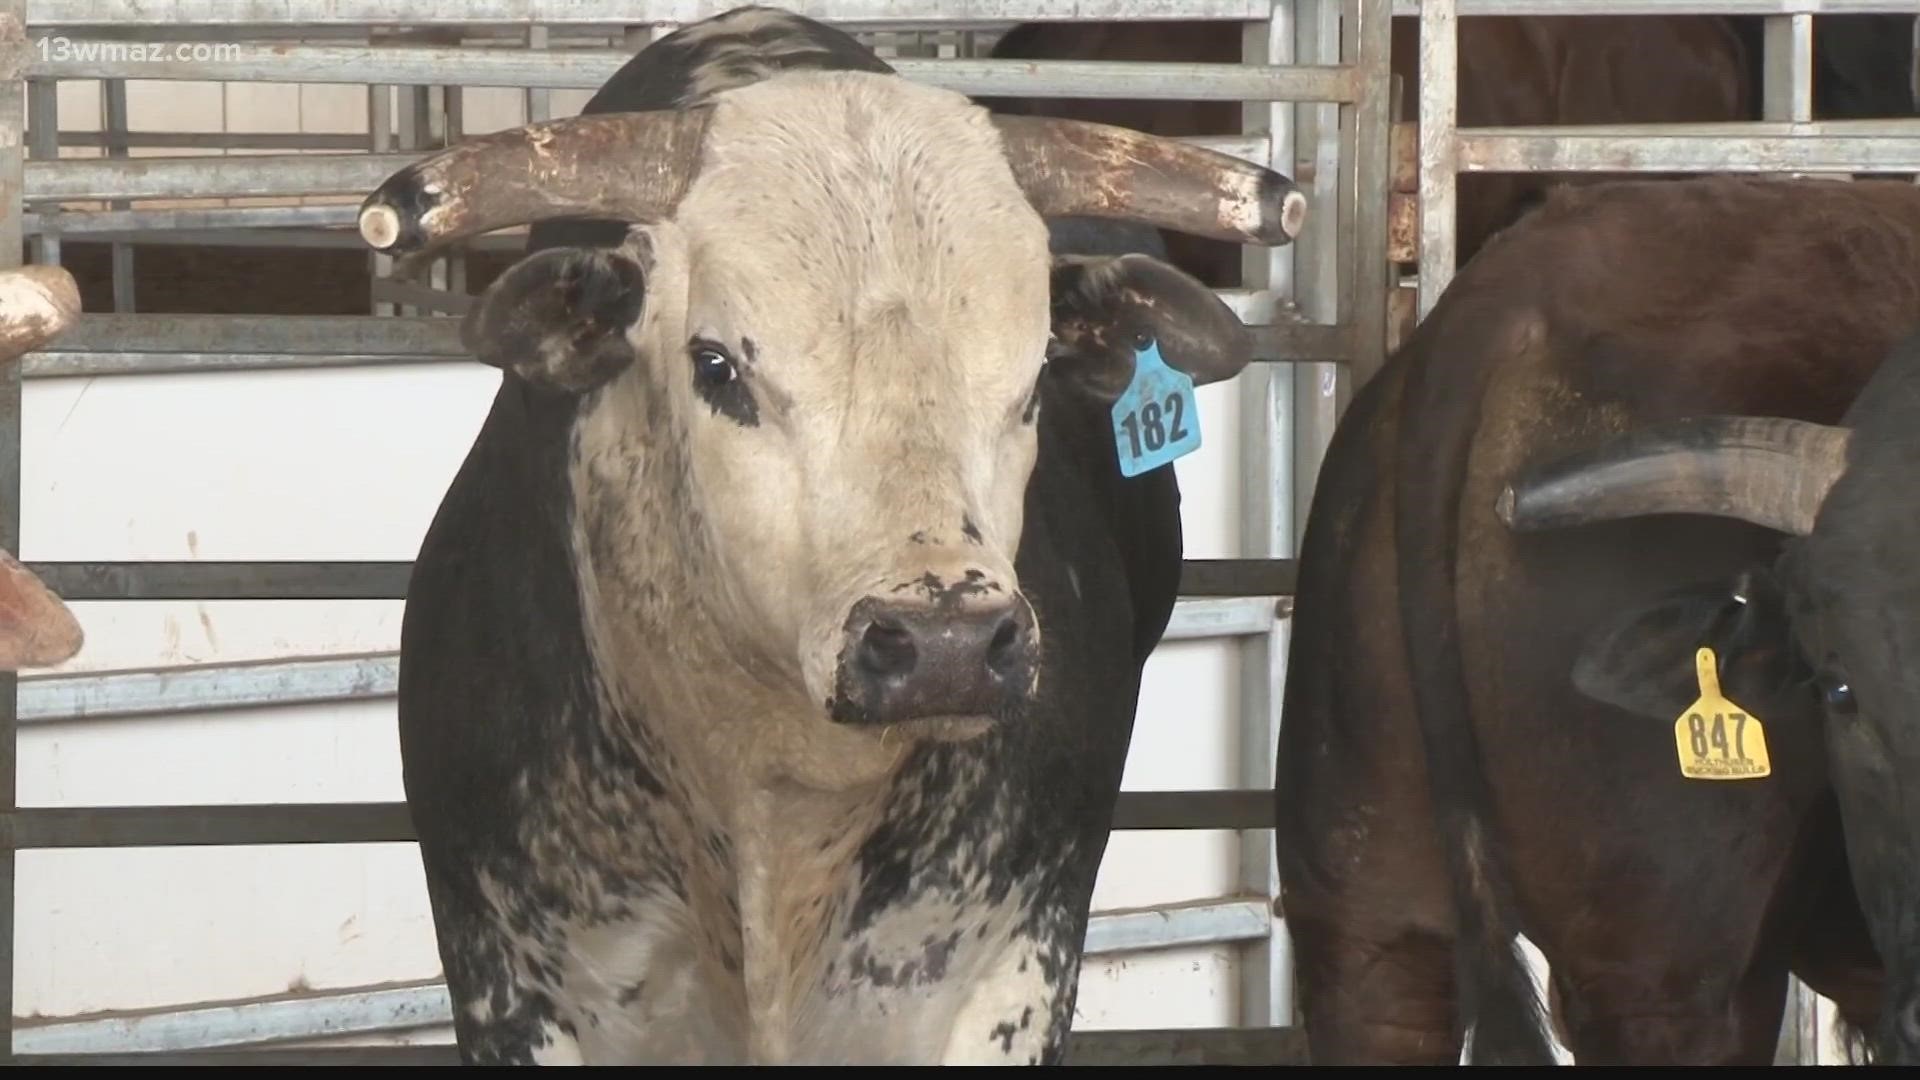 Cowboys and bullfighters will be showing off their skills in Perry.